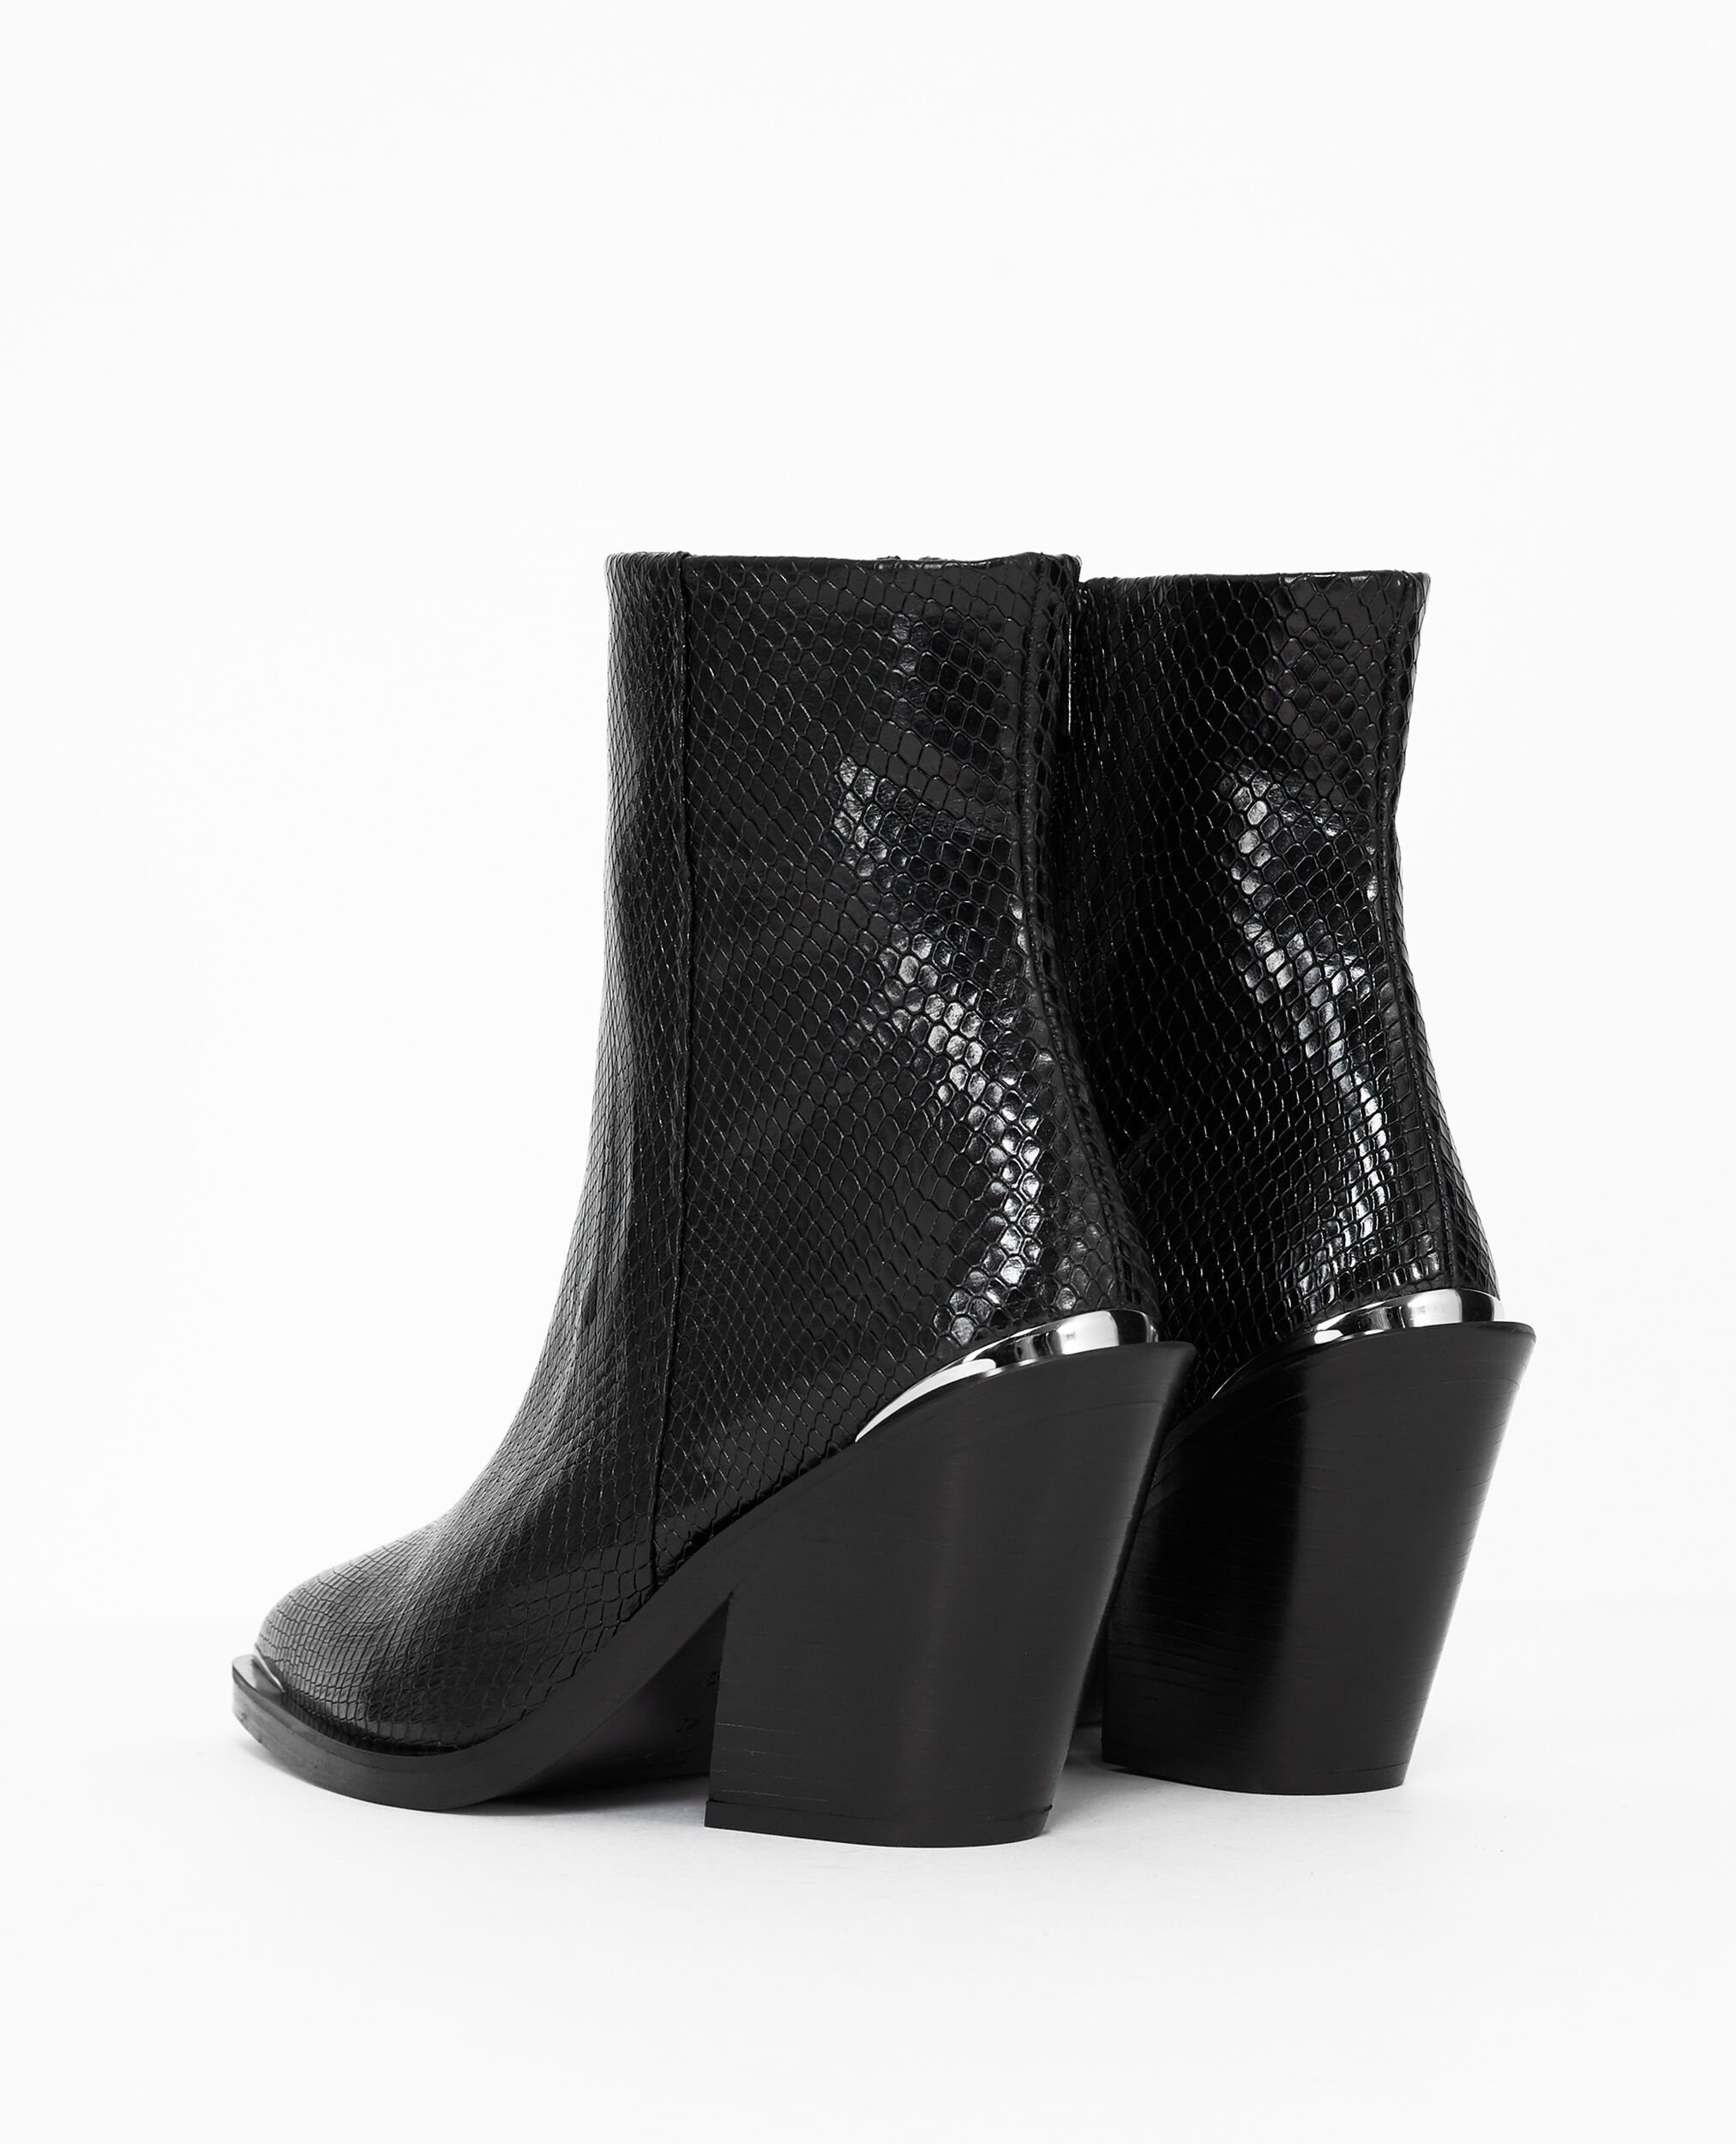 Heeled ankle boots in snake-effect leather, BLACK, hi-res image number null